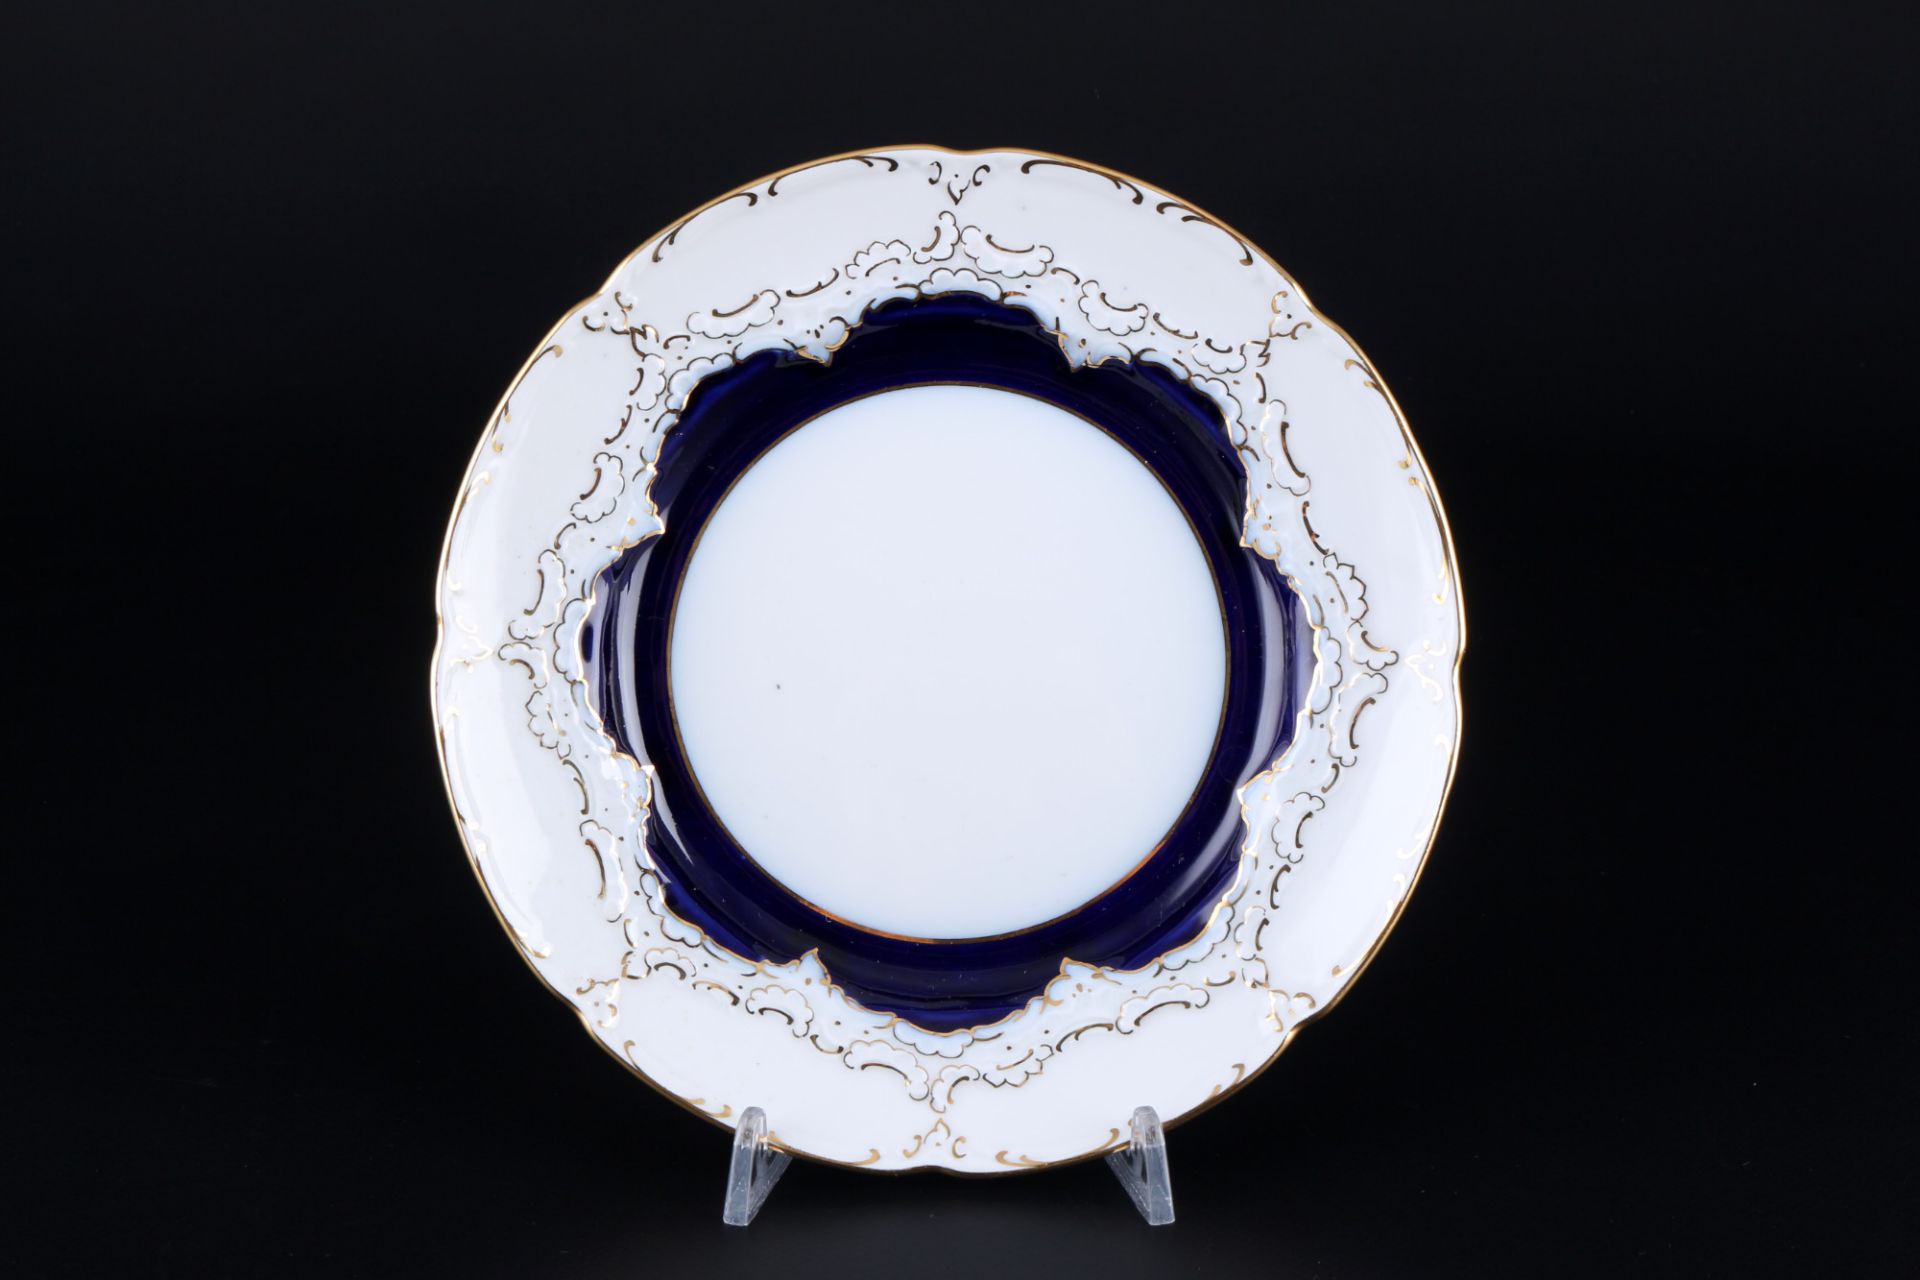 Meissen B-Form royal blue coffee cup with dessert plate 1st choice, Kaffeegedeck 1.Wahl, - Image 4 of 7